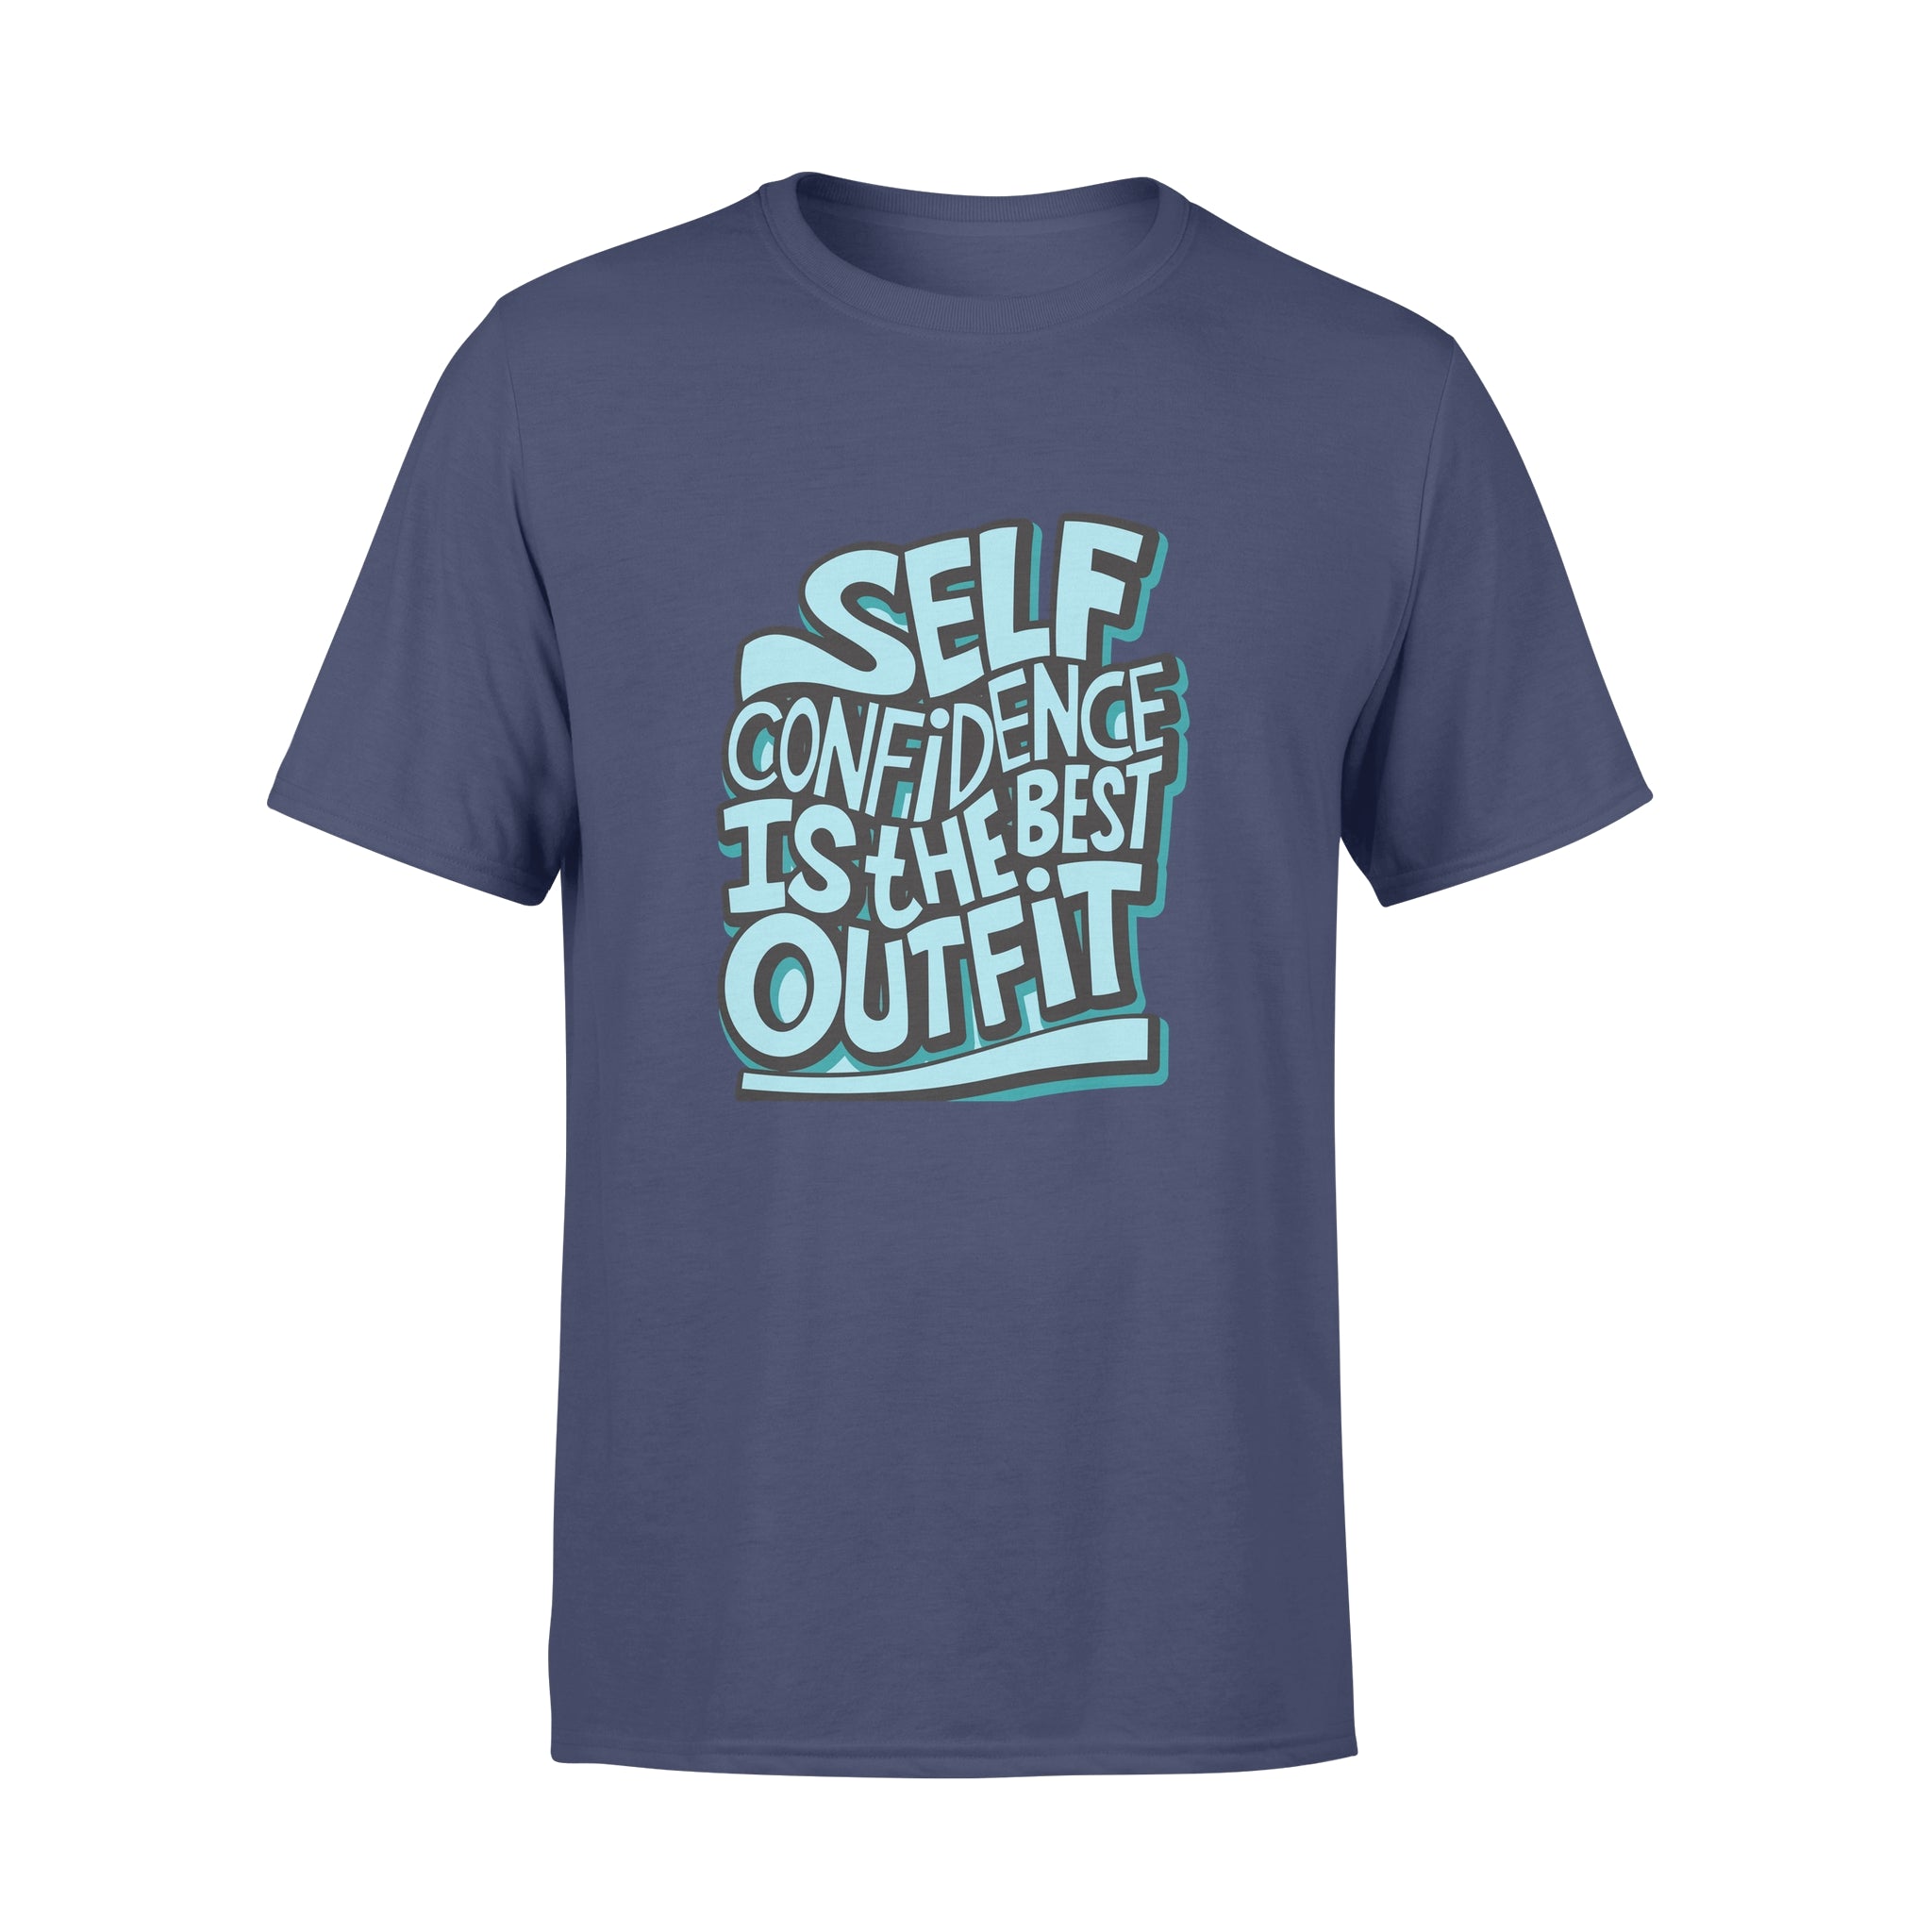 Self Confidence Is The Best Outfit -  T-shirt